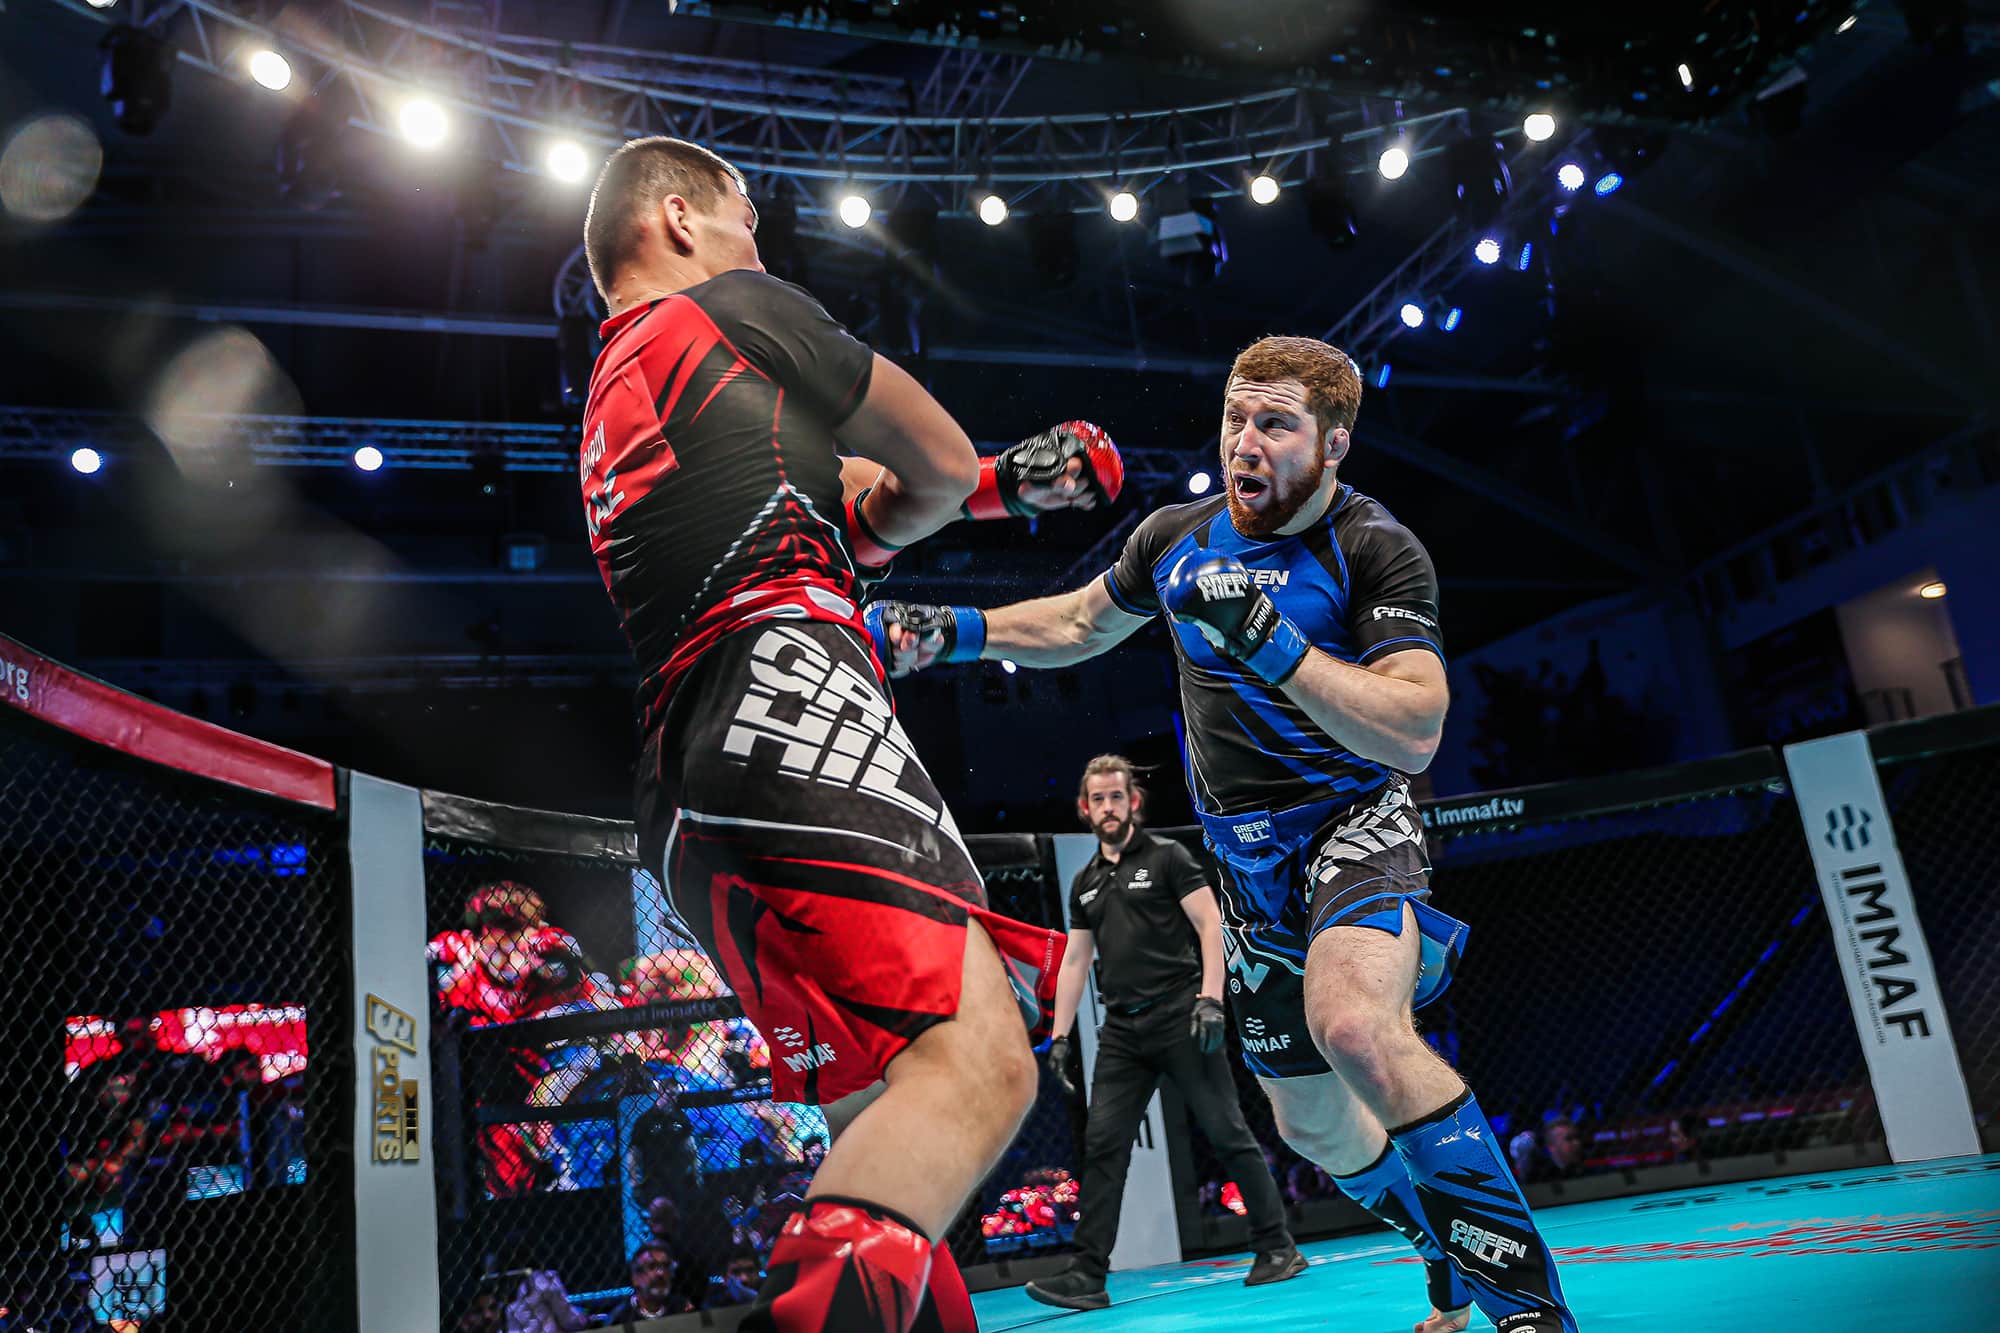 Best male athlete nominees announced for 2020 IMMAF Amateur MMA Awards